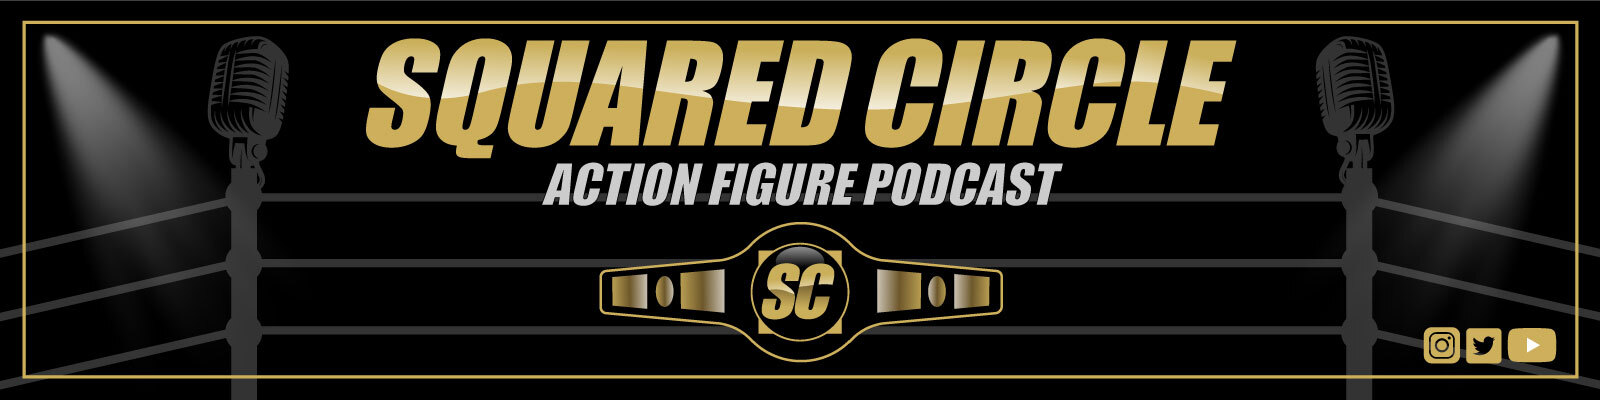 Squared Circle Action Figure Podcast